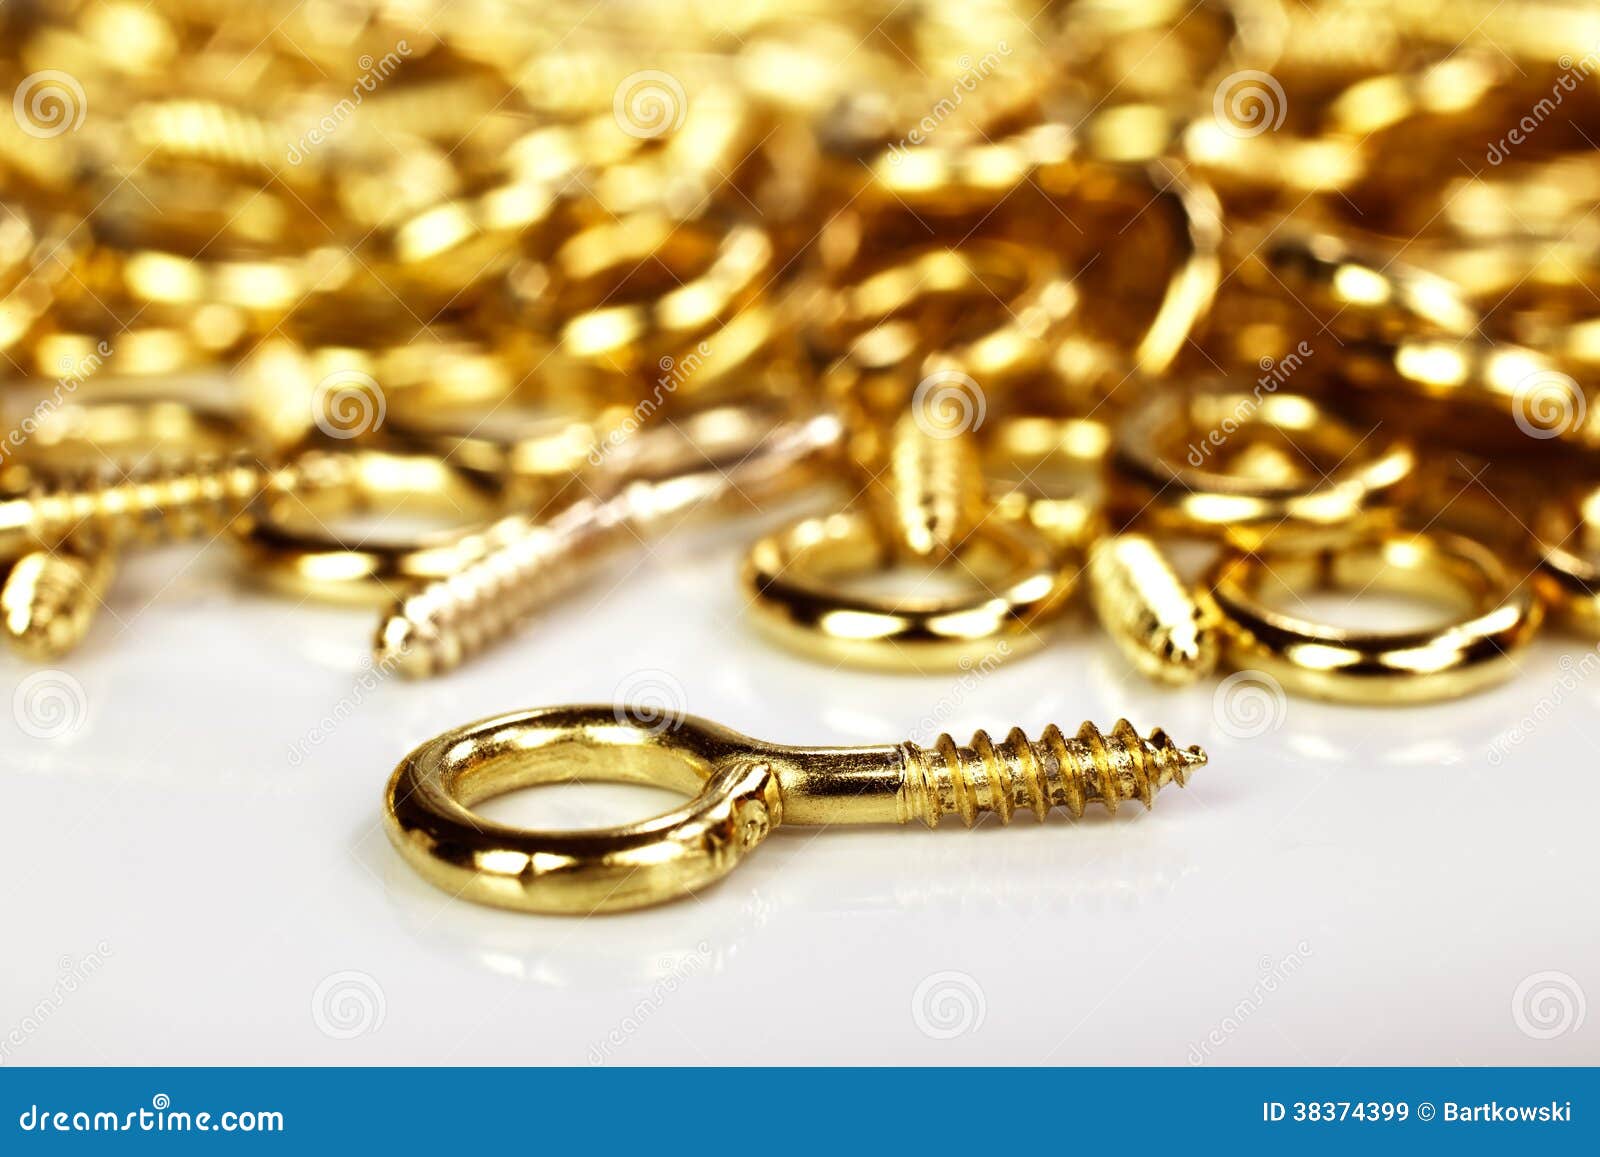 golden hooks used by picture framers